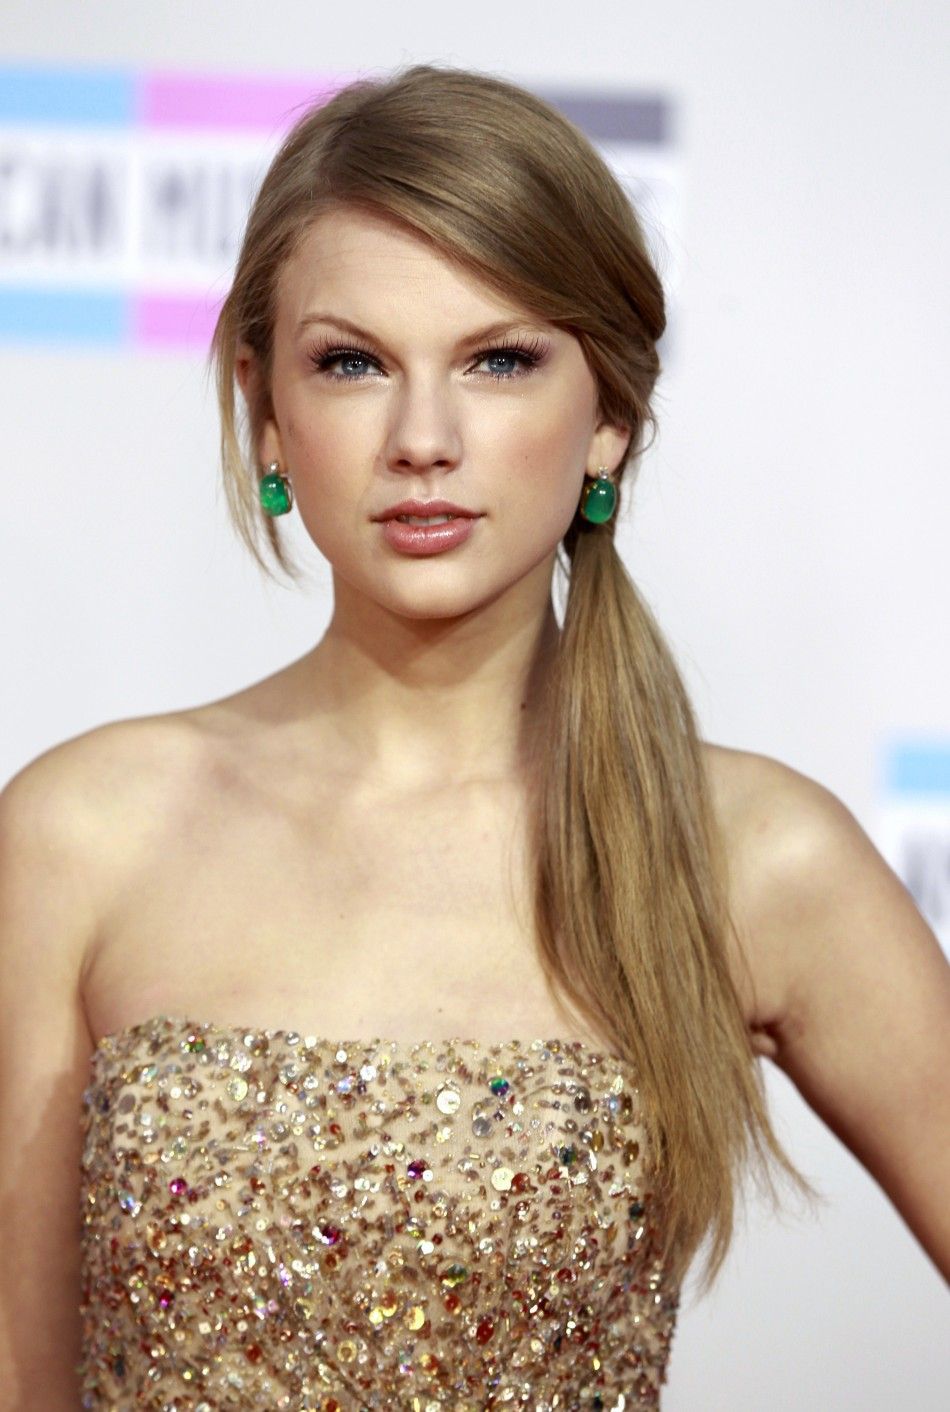 Singer Taylor Swift arrives at the 2011 American Music Awards in Los Angeles